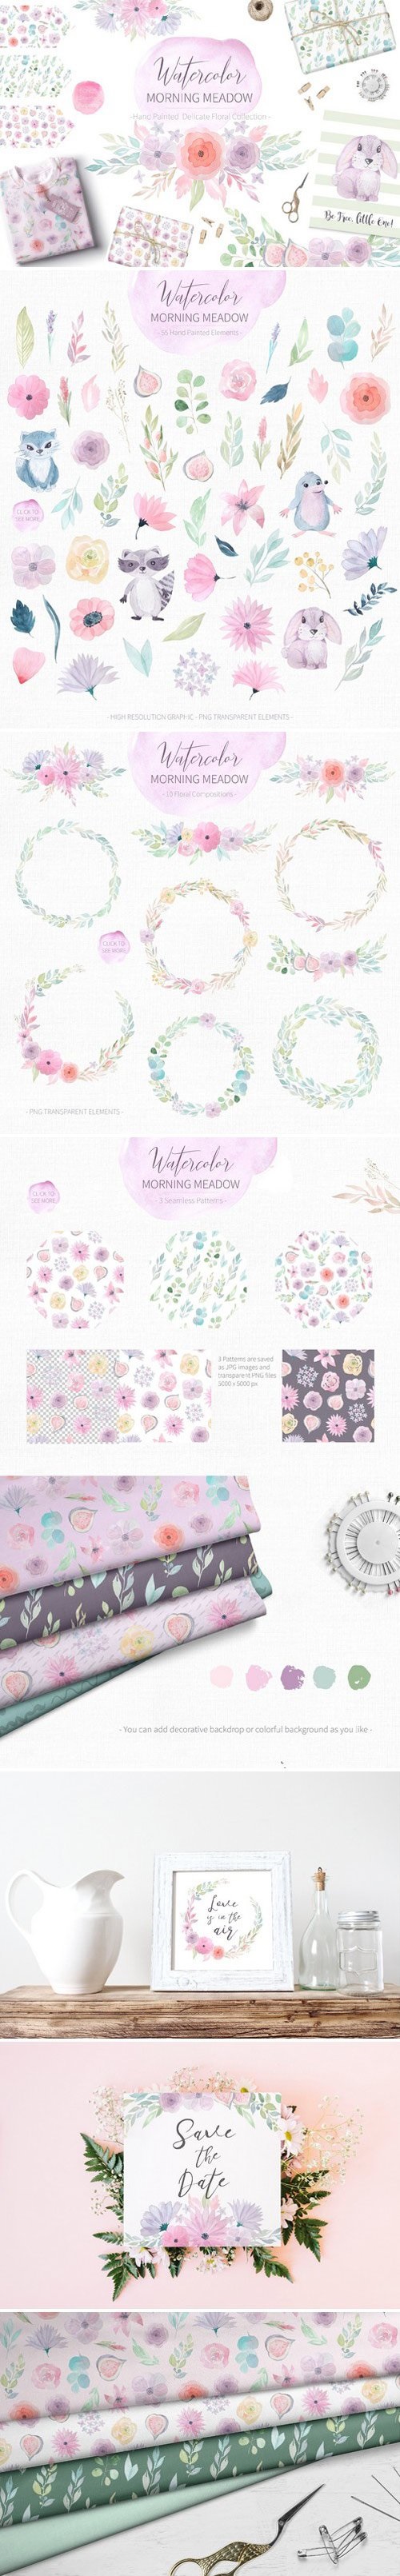 Watercolor Morning Meadow Floral Set 2138791